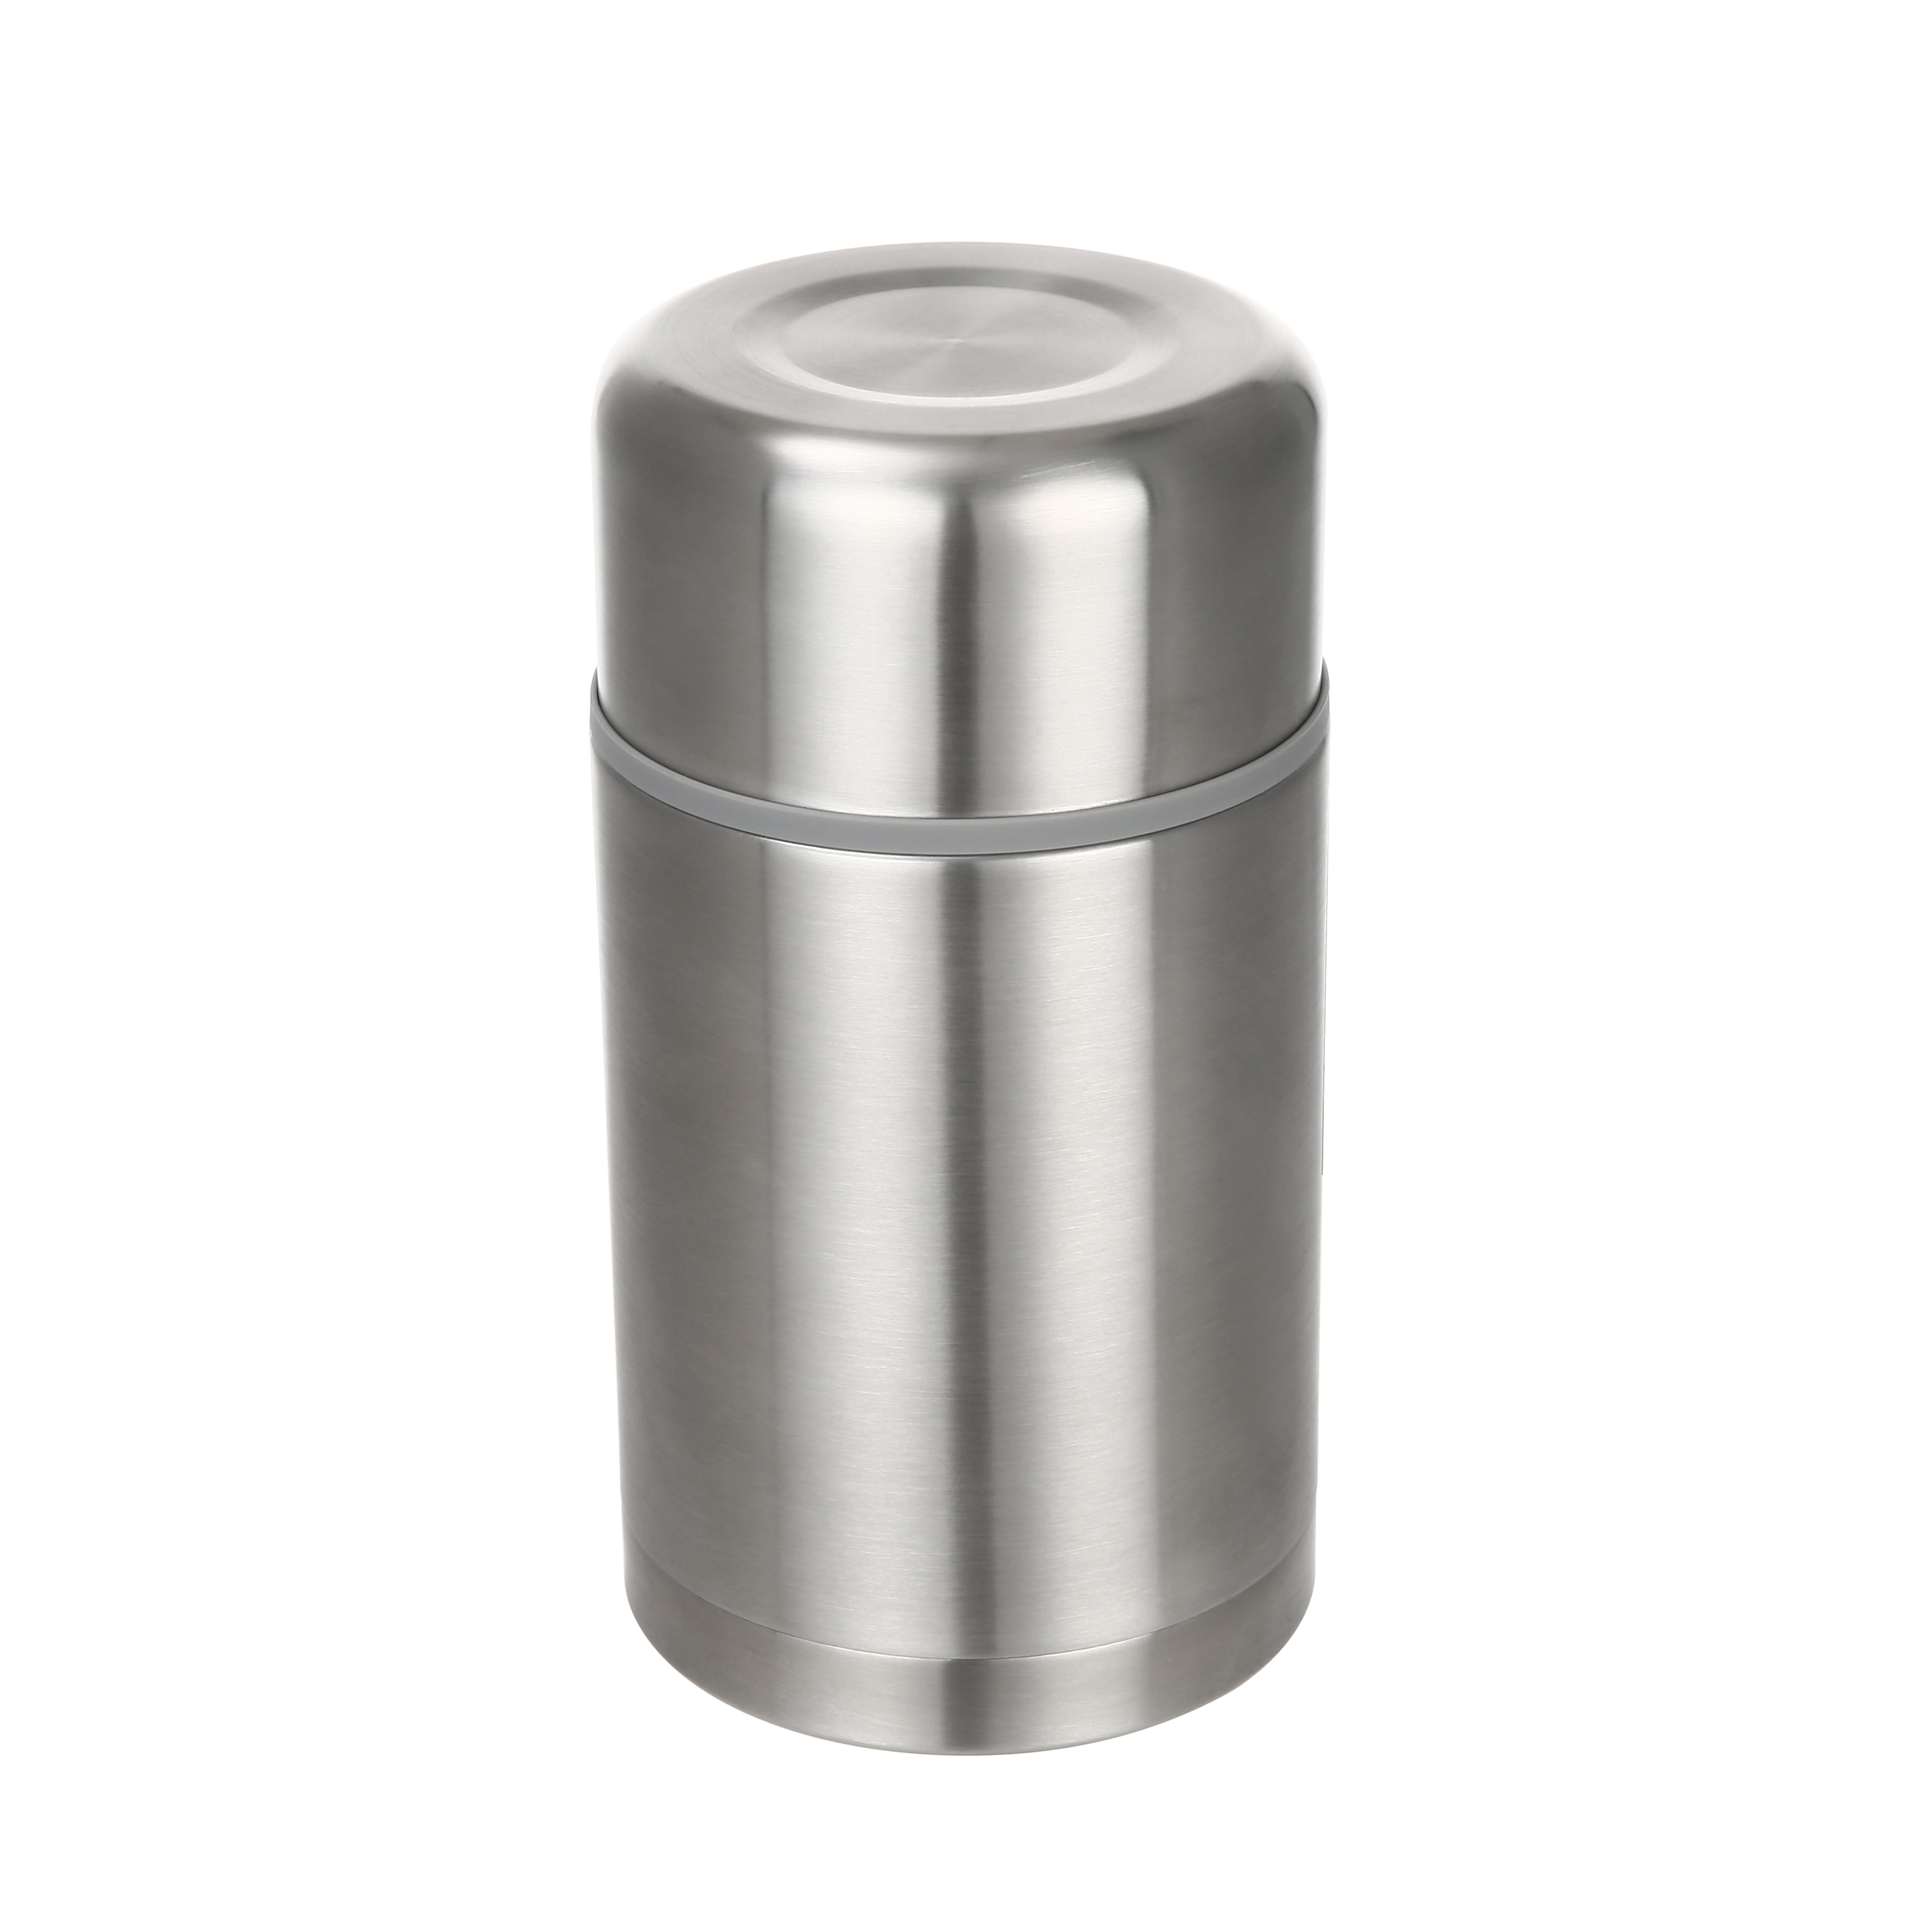 Mainstays 27 Ounce Stainless Steel Insulated Food Jar - Walmart.com Mainstays Stainless Steel Insulated Food Container